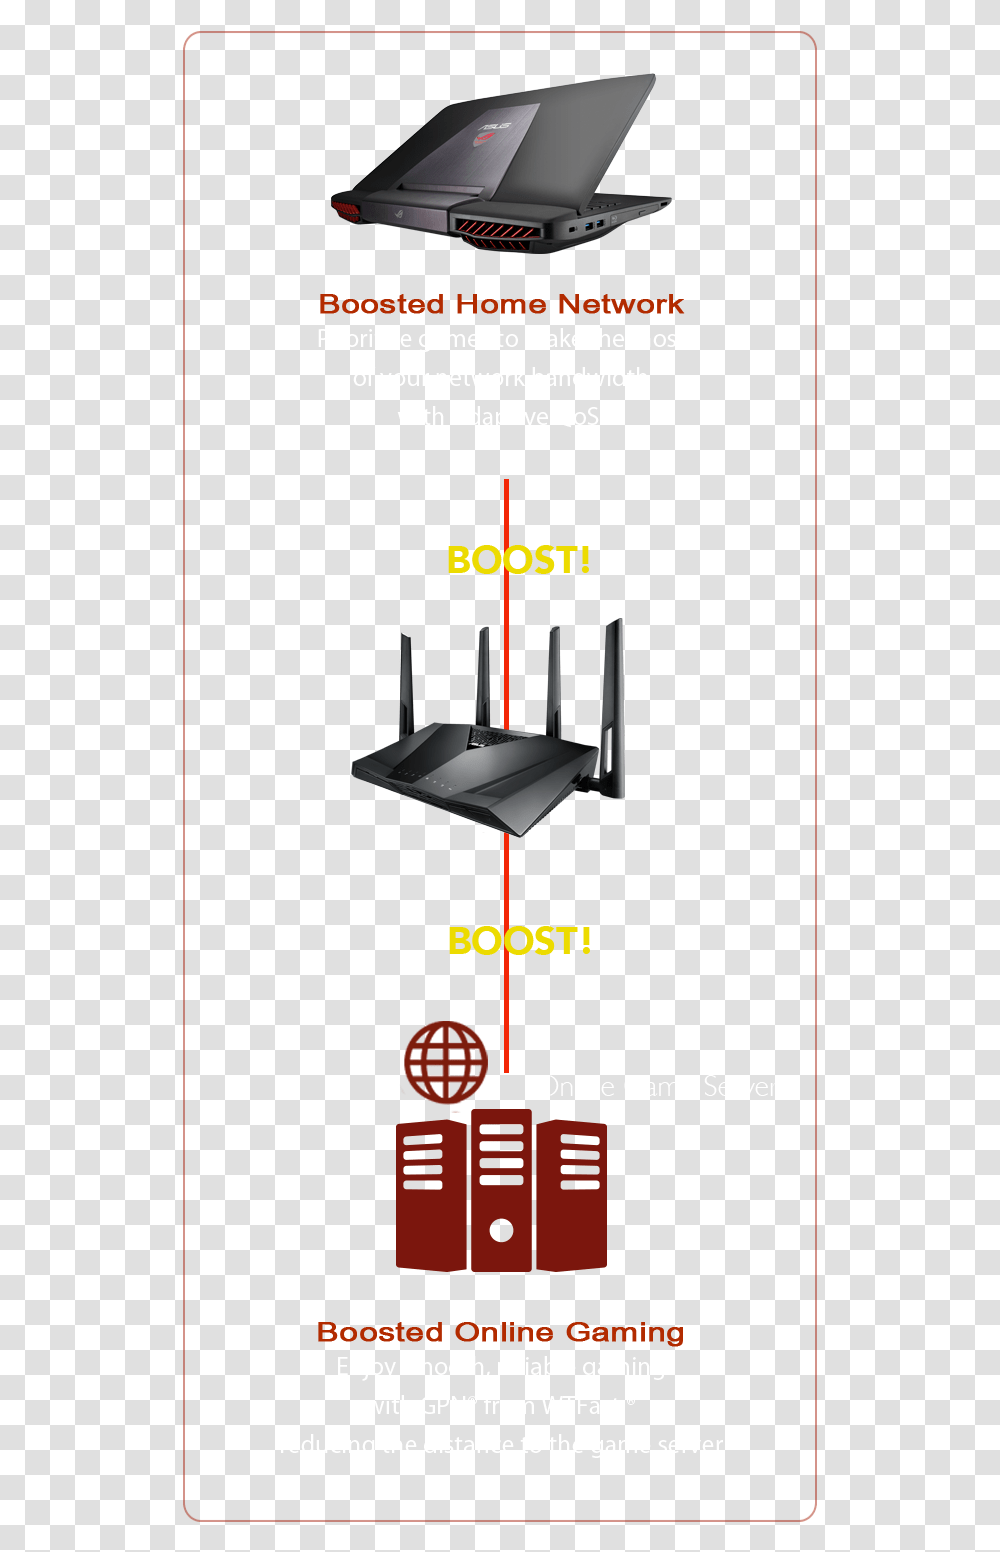 Rt Ac3100 Gaming Router Boosts Both Home Network And Computer Network, Hardware, Electronics, Modem, Flyer Transparent Png